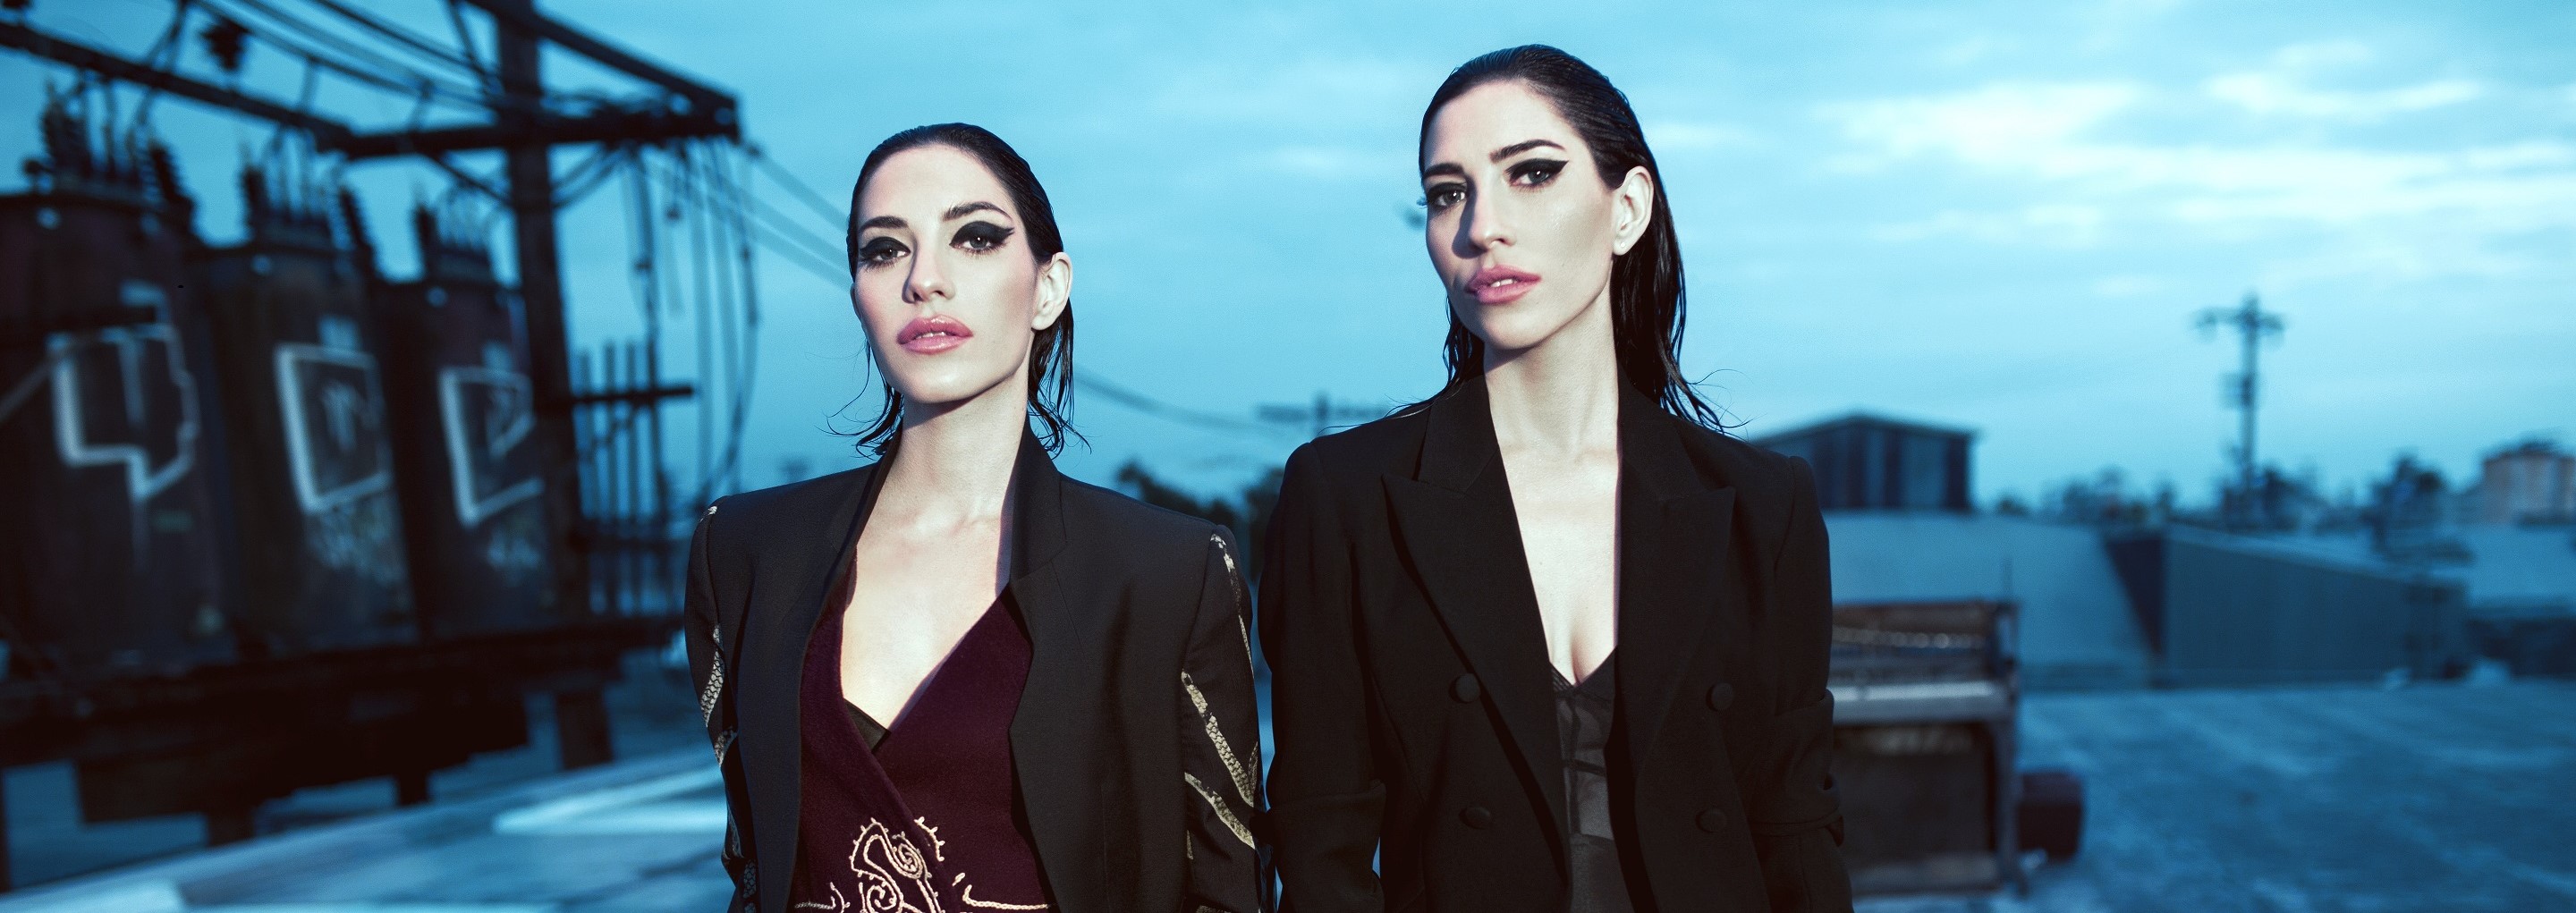 The Veronicas Publicity Photo THE ONLY HIGH